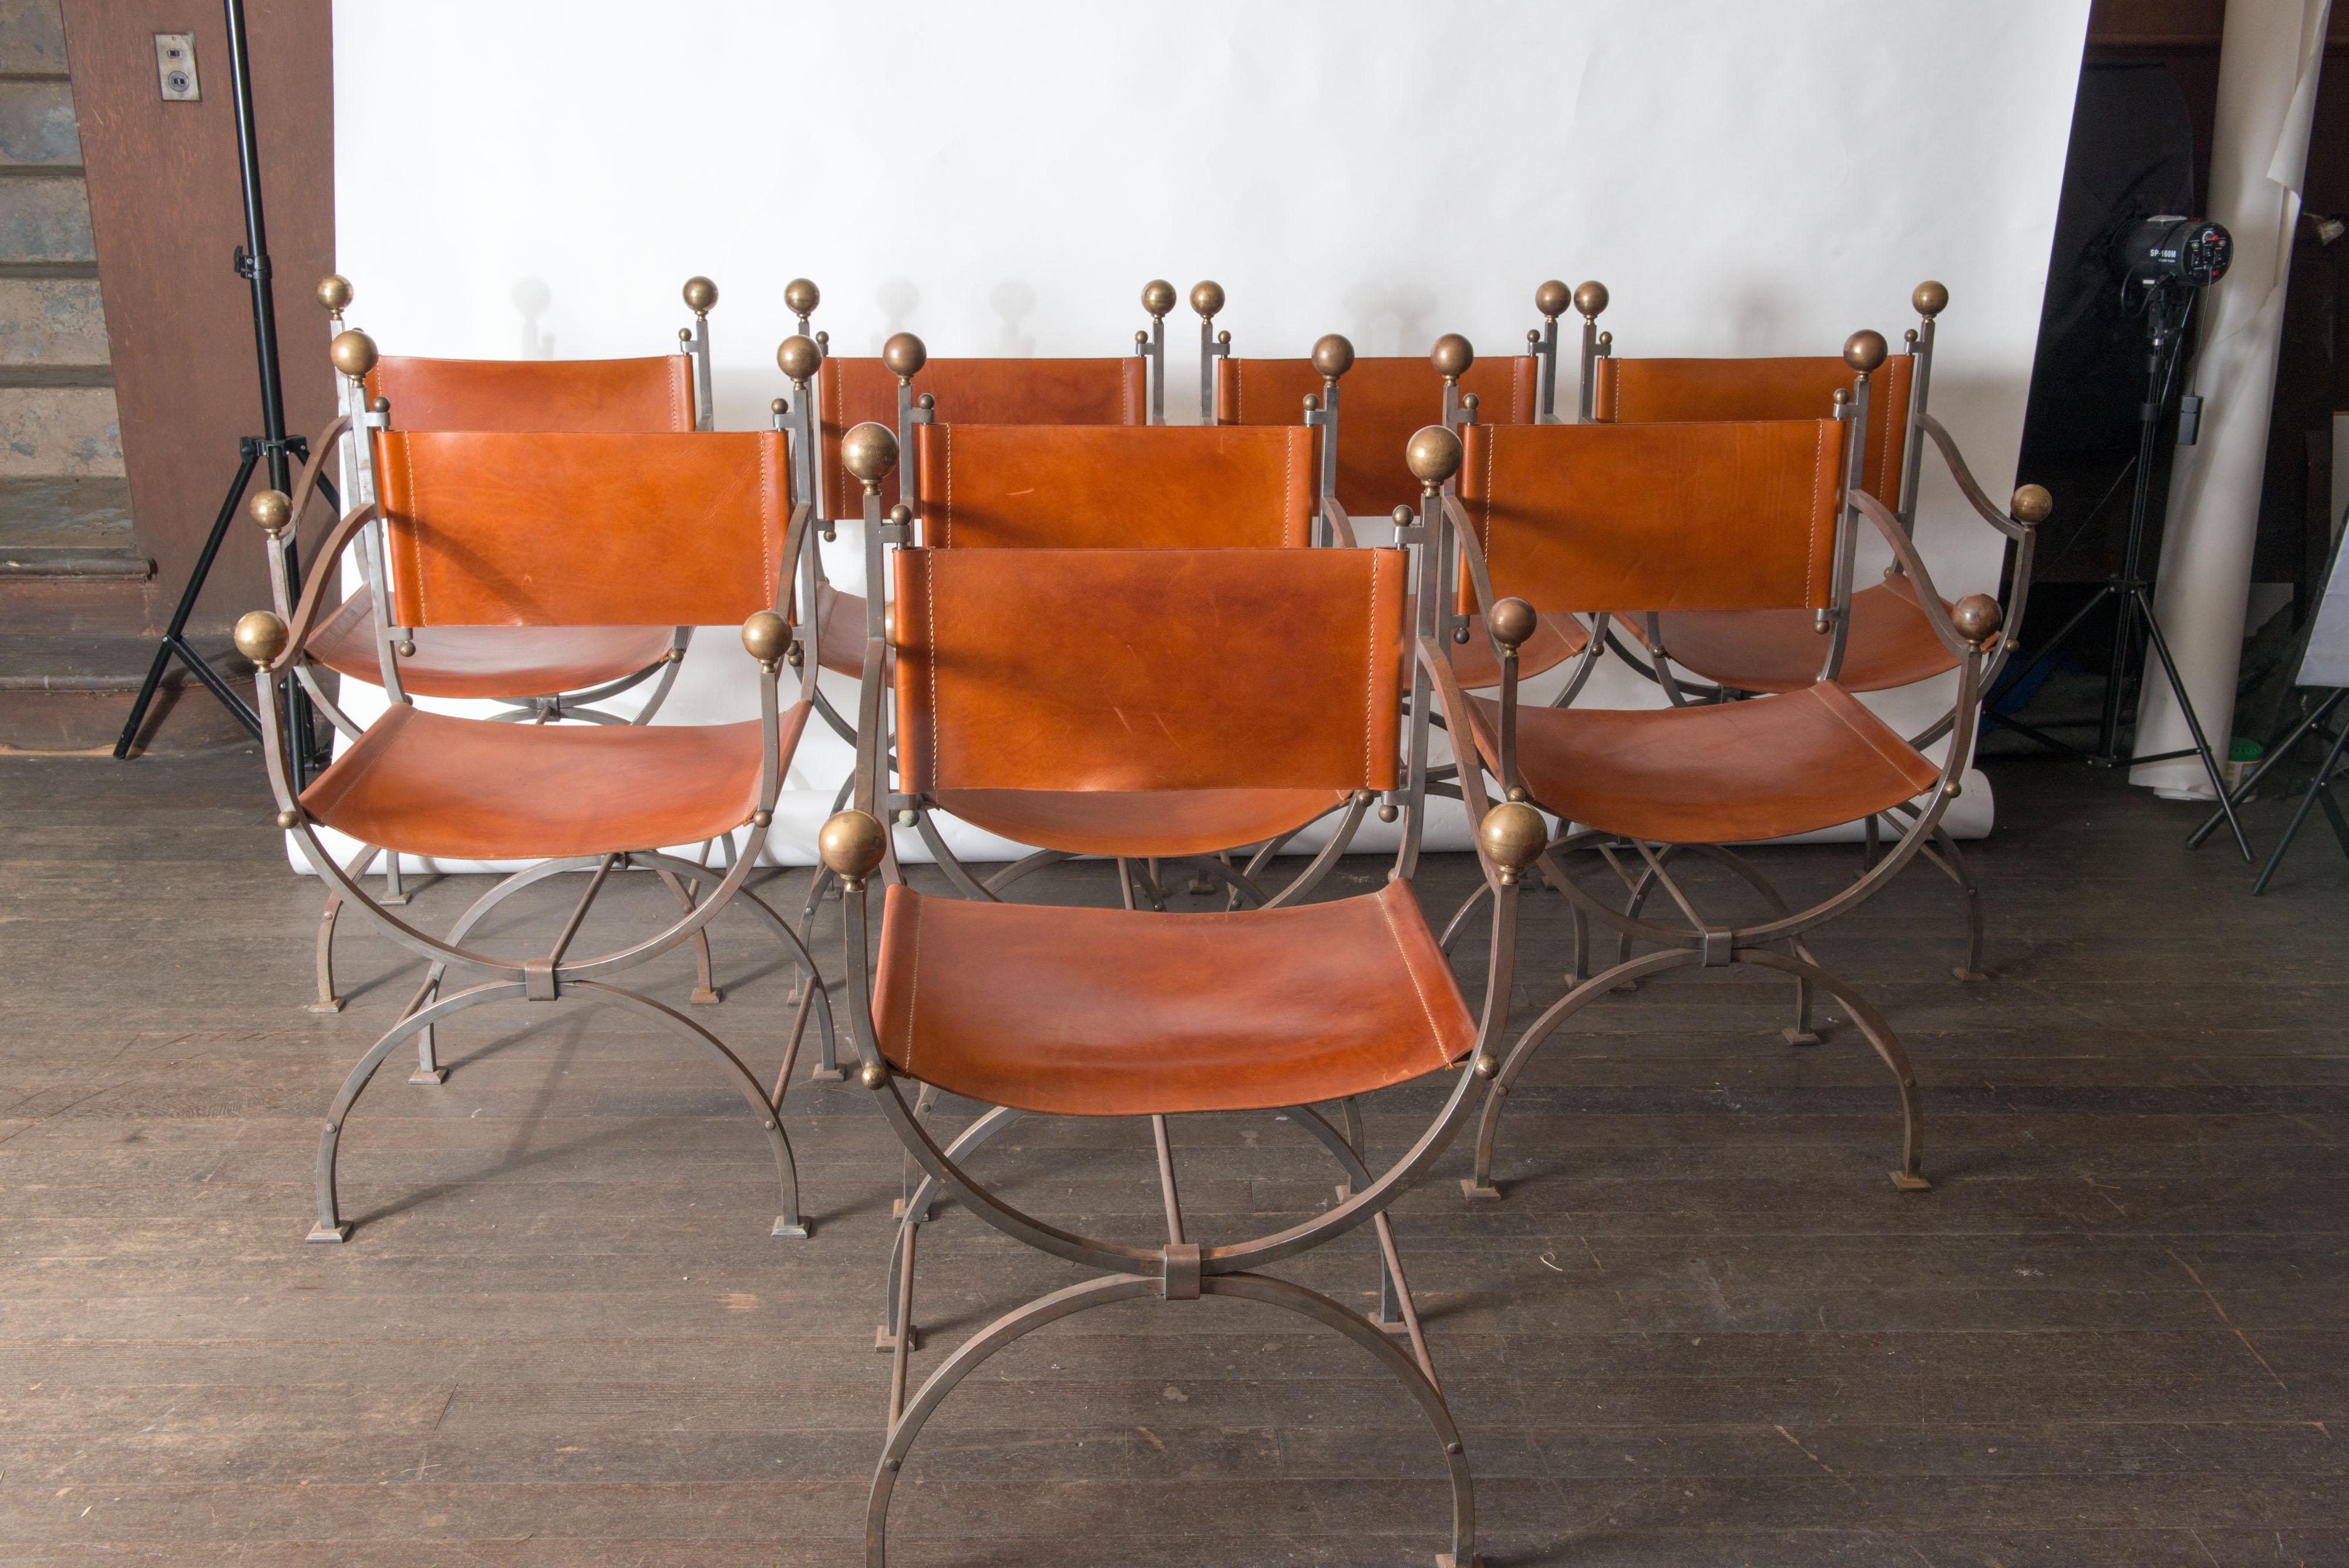 Set of 8 mid-20th century Italian Savonarola curule brass and steel armchairs with leather seat and back rest. They can be purchased as pairs for $4000. Each chair has four brass ball finials, and X-Form base. 
Created in Italy during the Midcentury